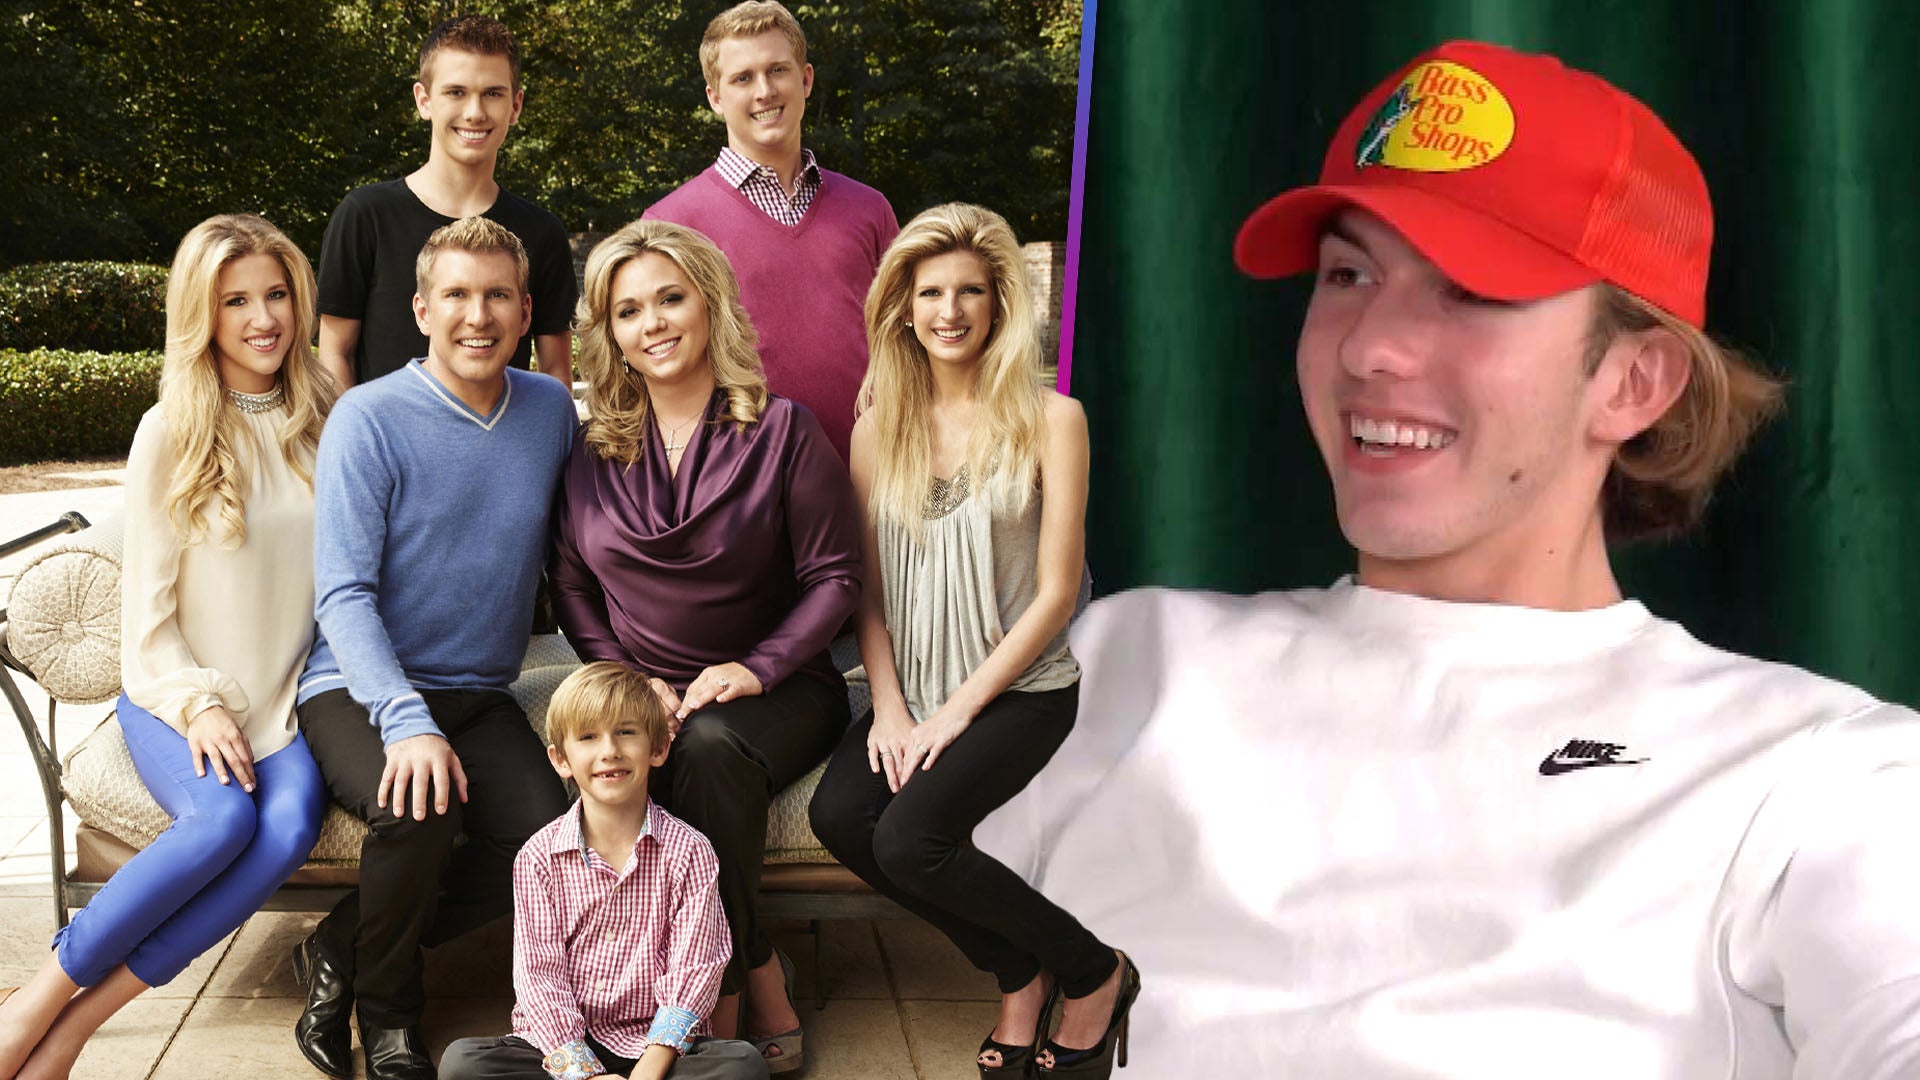 Why Grayson Chrisley Says He'll Never Watch the Family's Reality Show